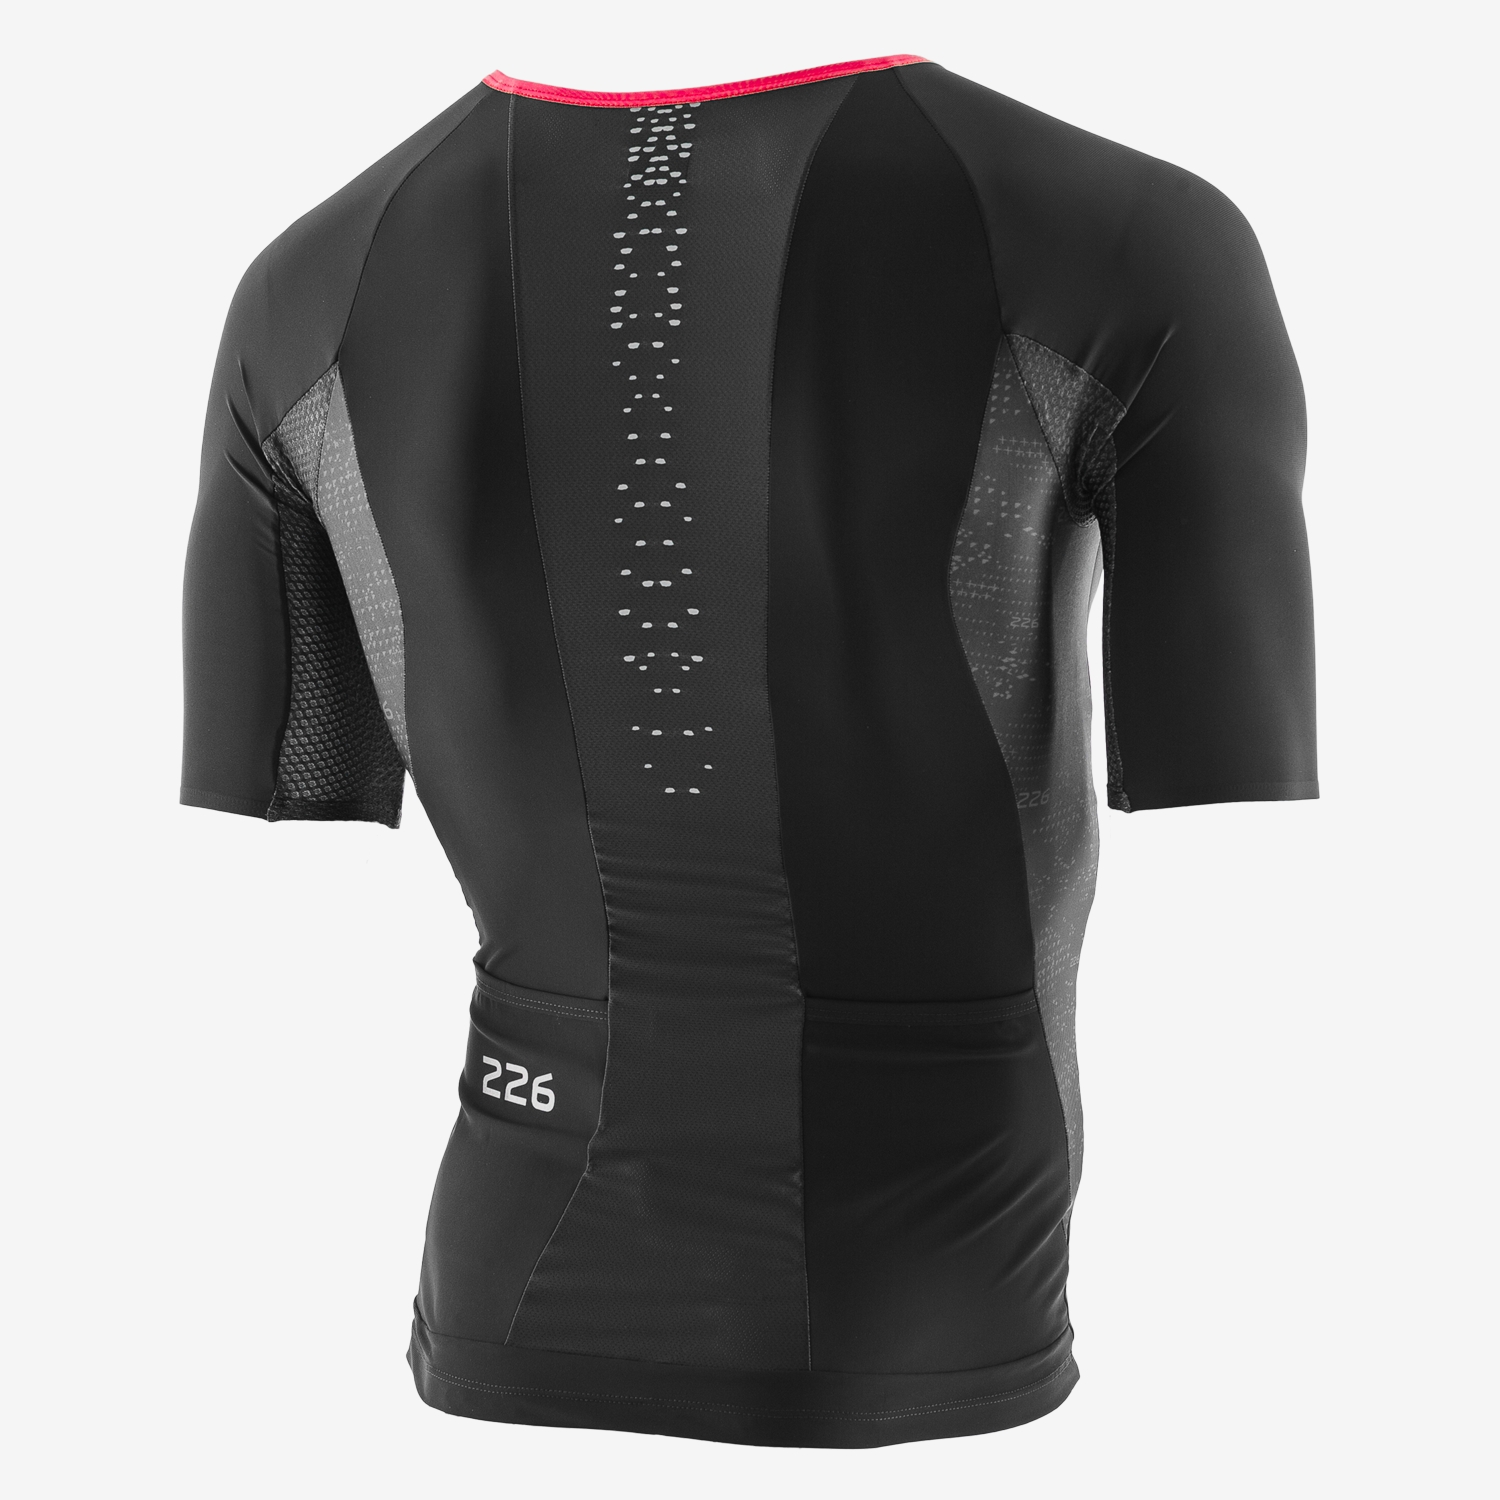 Orca 226 Perform Tri Jersey - Tri Clothing - Cycle SuperStore